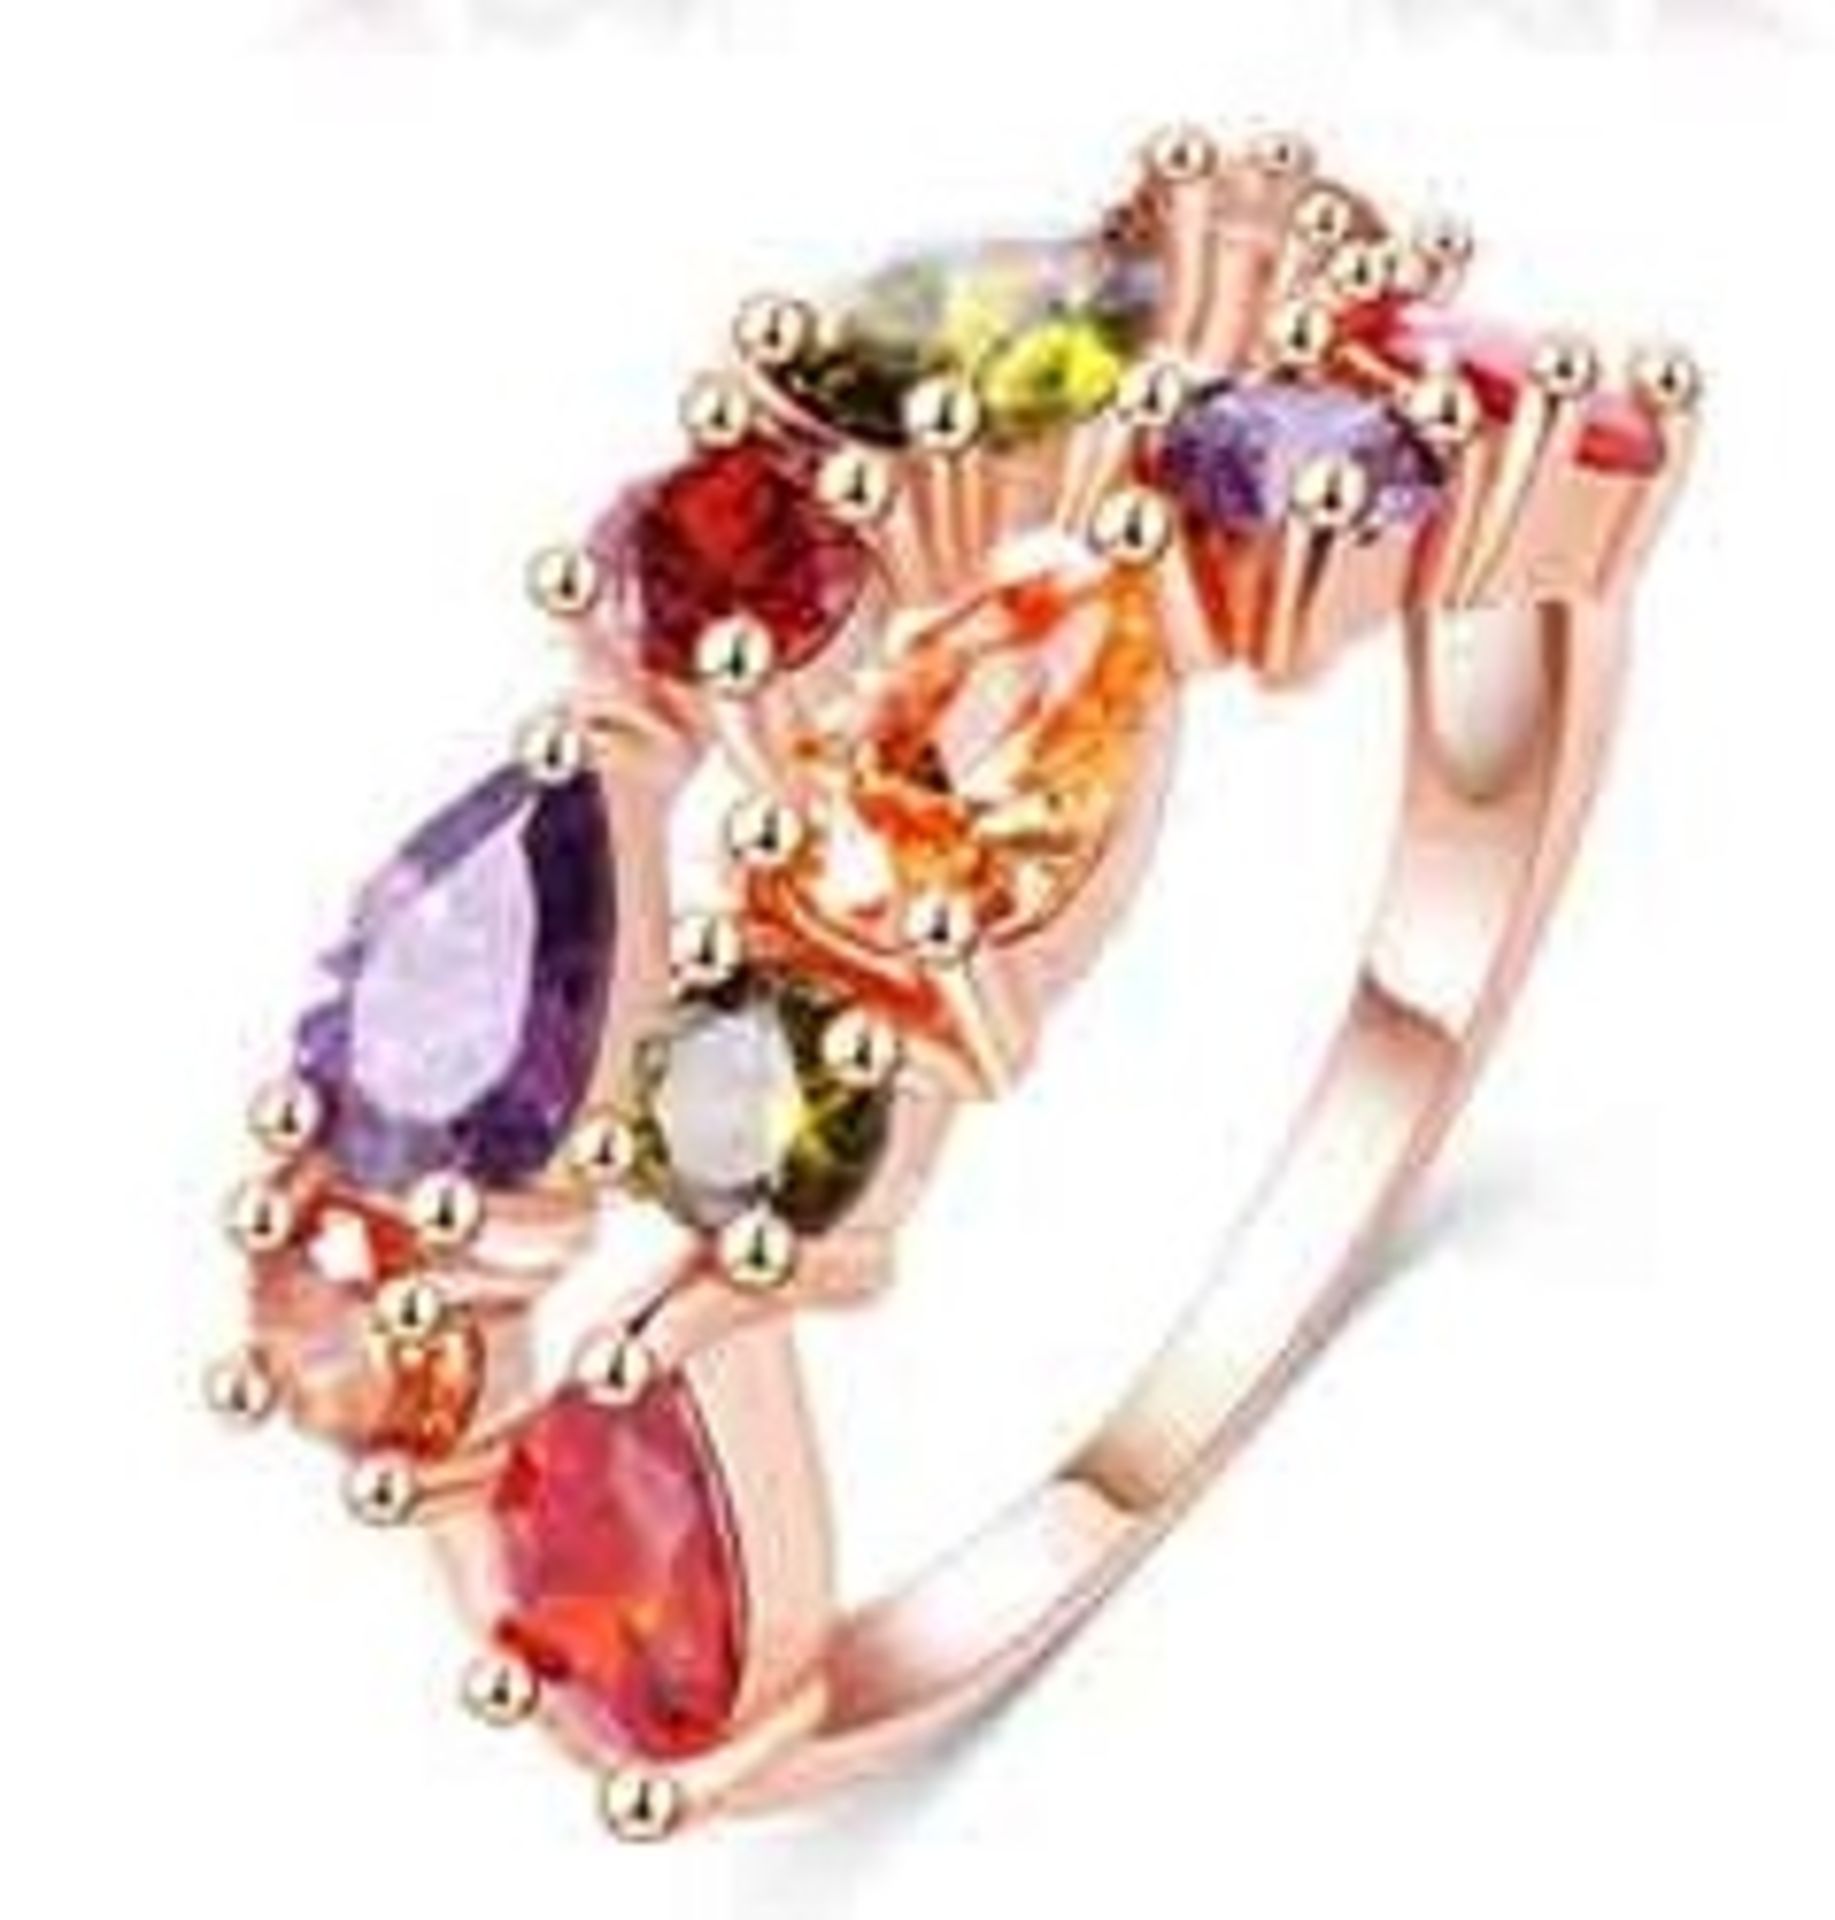 V Brand New Rose Colour Austrian Crystal Multi Stone Ring X 2 YOUR BID PRICE TO BE MULTIPLIED BY